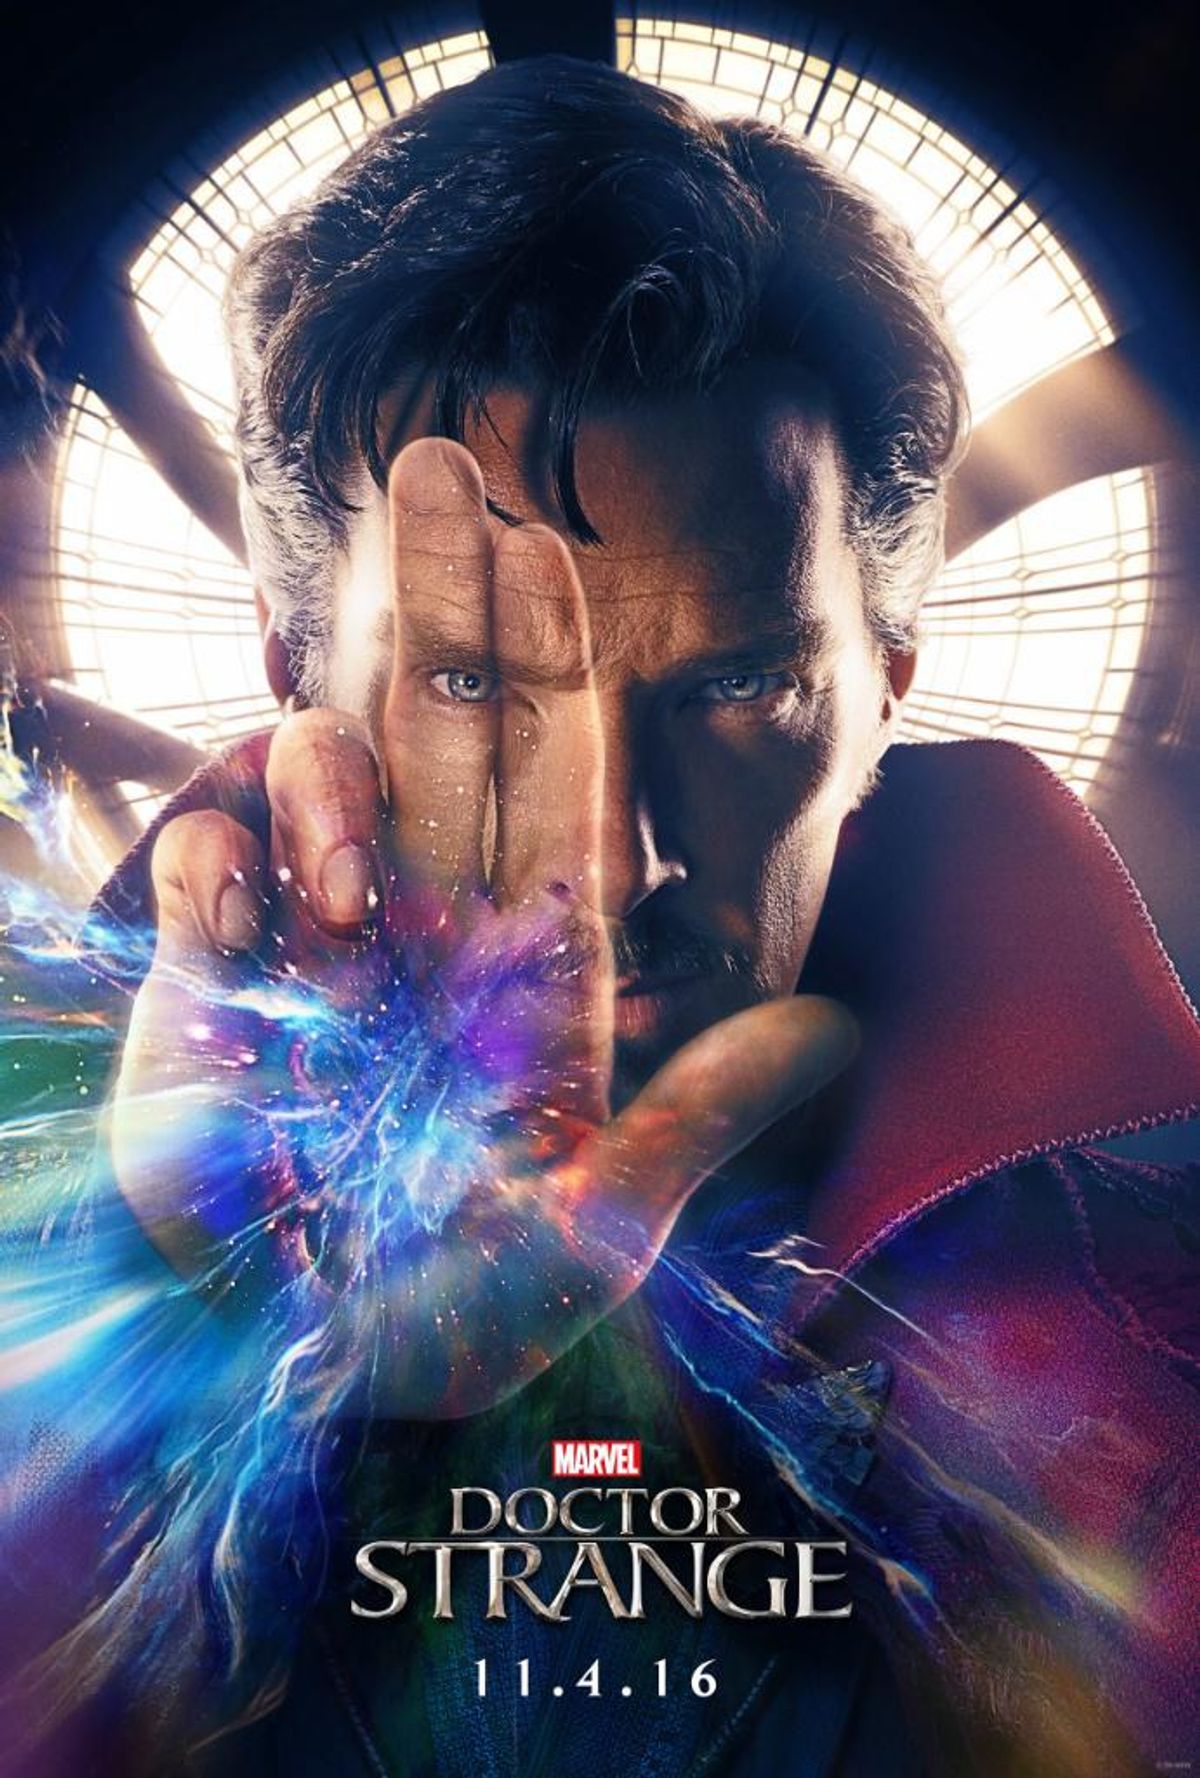 Will Dr. Strange Be Successful in Theaters